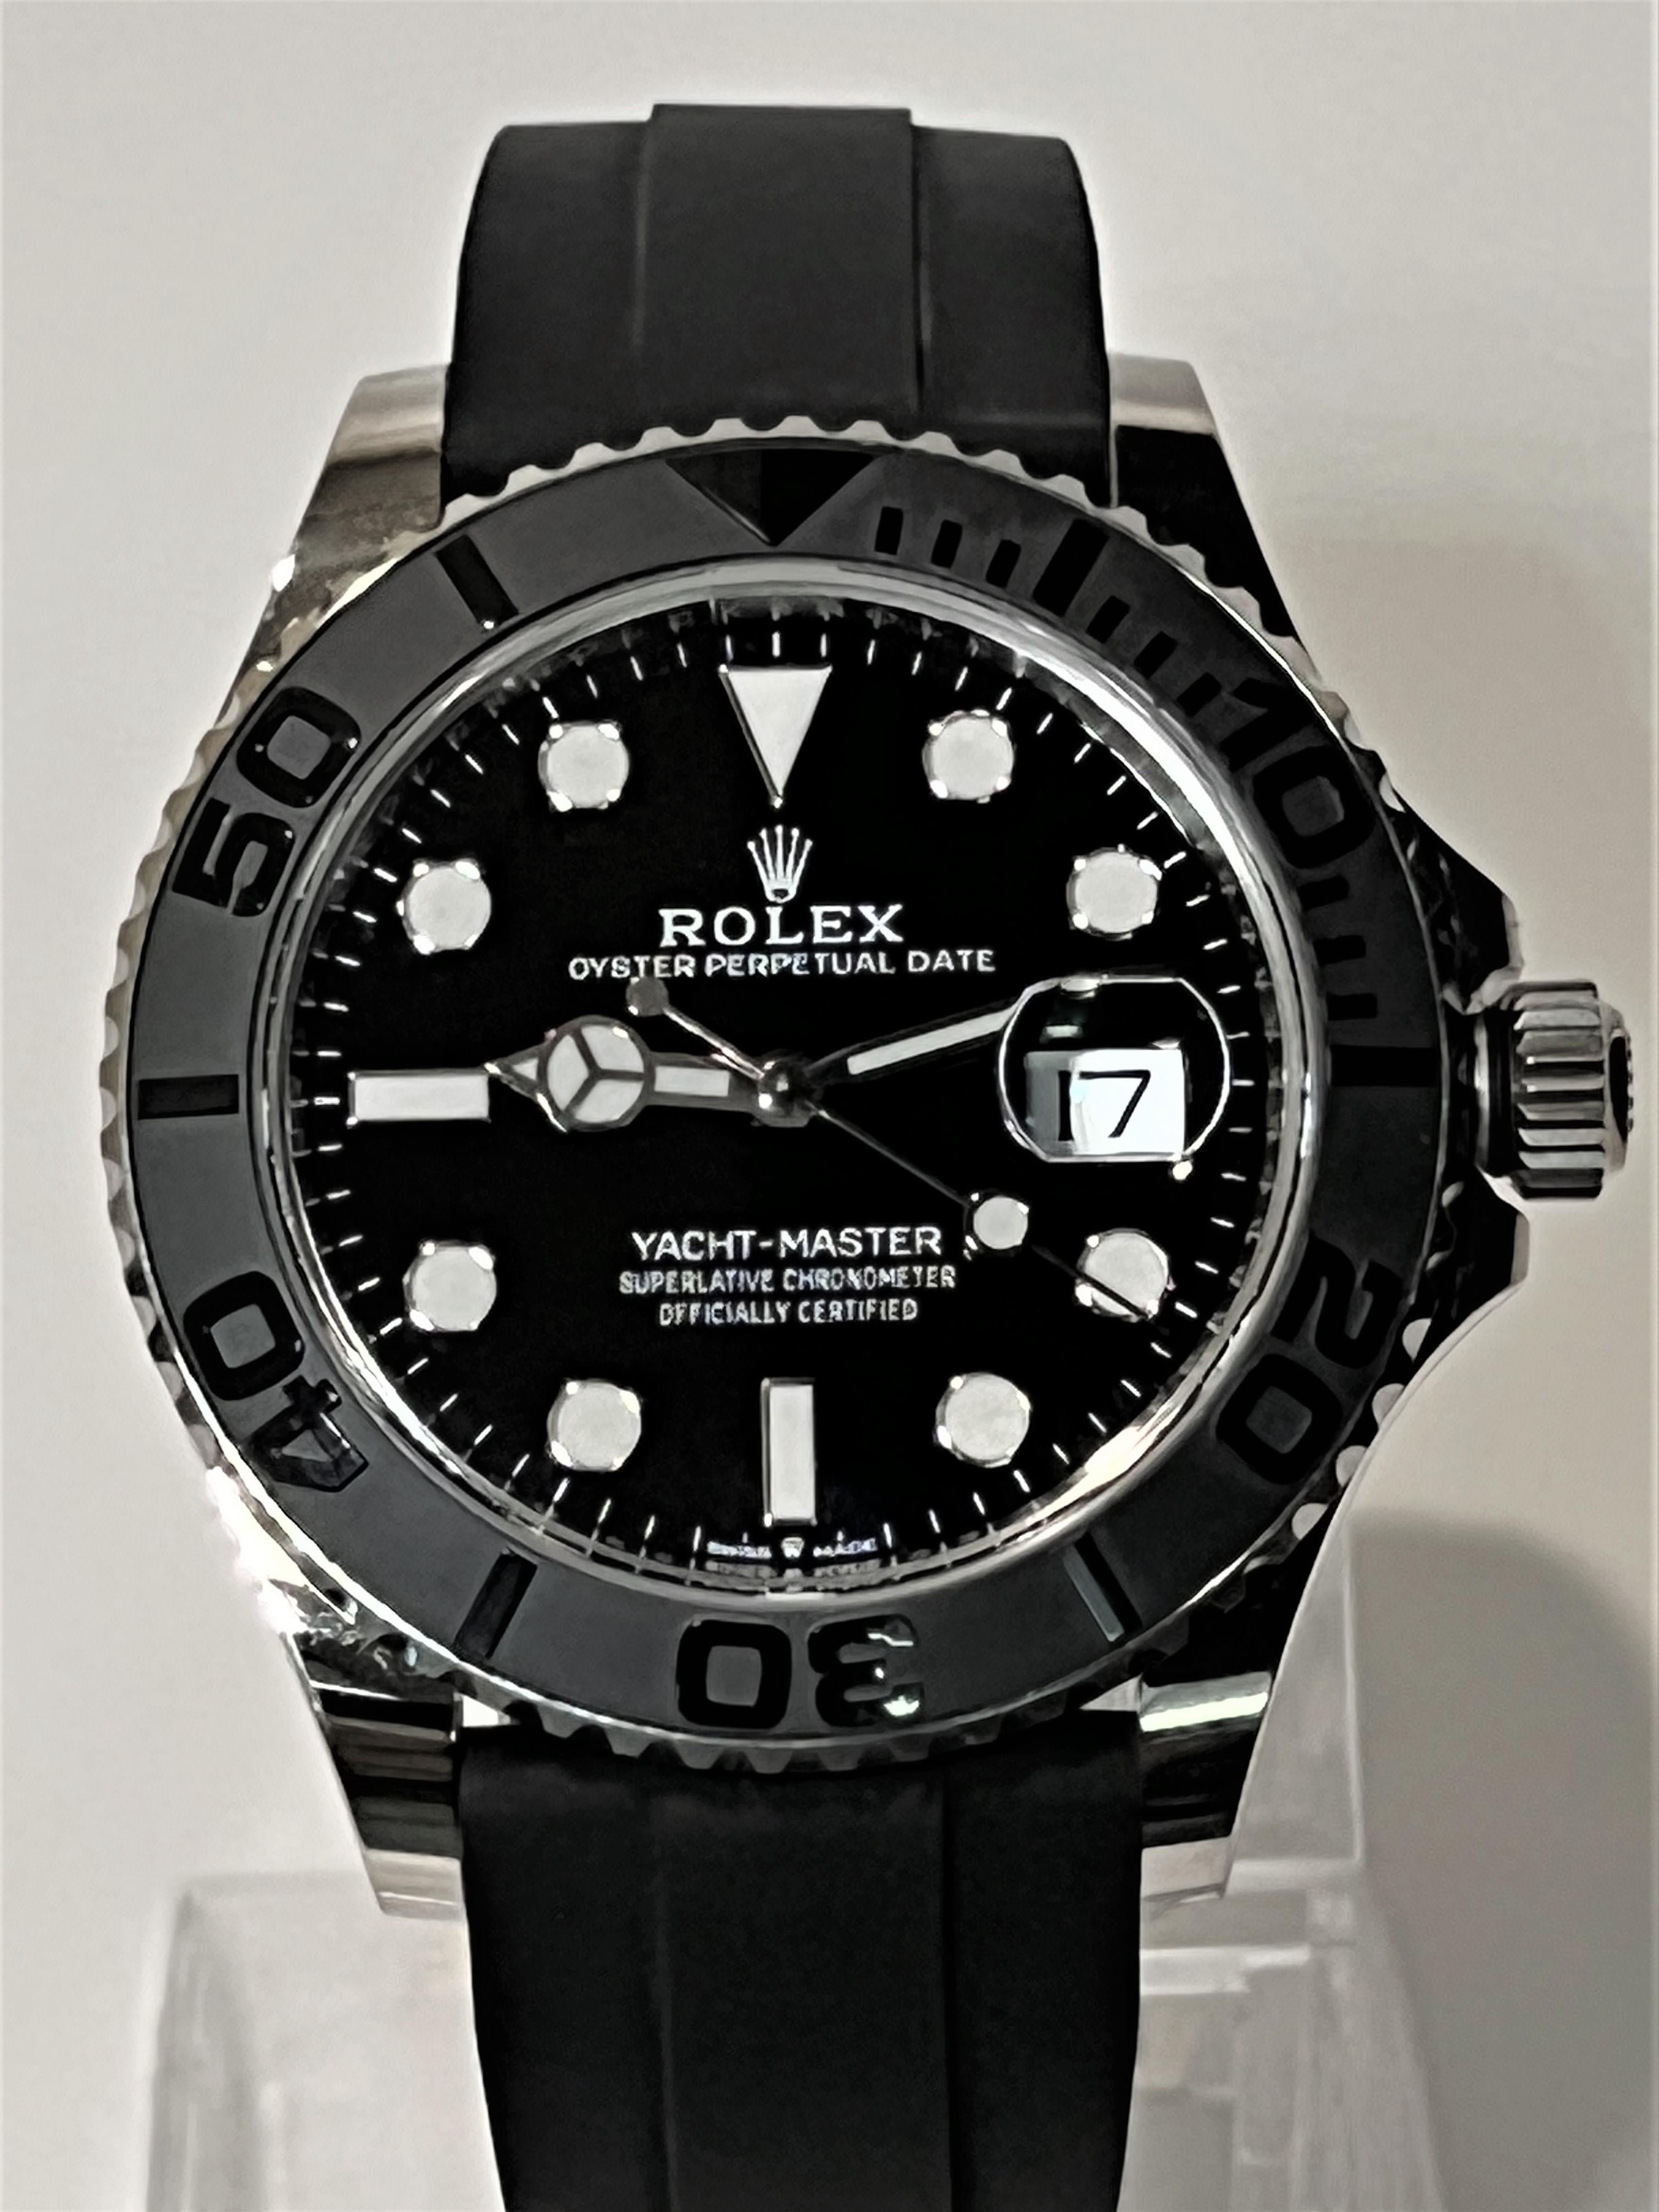 Unworn, all papers box etc.

The newest Yacht-master line, the 42mm in 18k white gold is a tour de force in Rolex design and engineering. 

Rolex has brilliantly taken one of its least desirable lines and with a bit of clever design turned it into